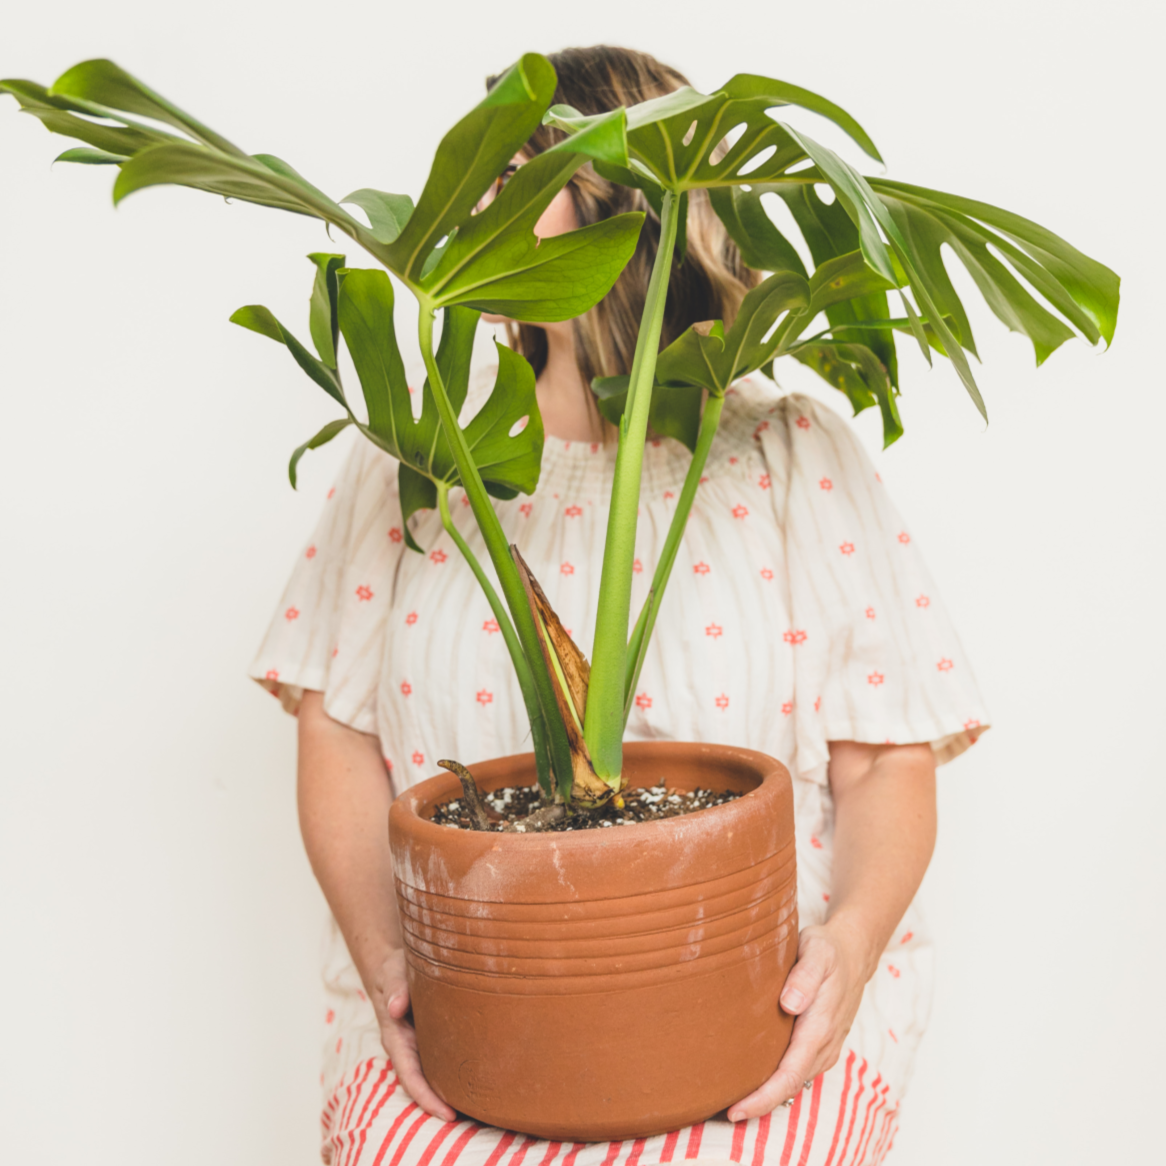 If you're looking for houseplants that are hard to kill, look no further! Check out these 9 must have houseplants by Clever Bloom. #houseplants #hardtokillplants